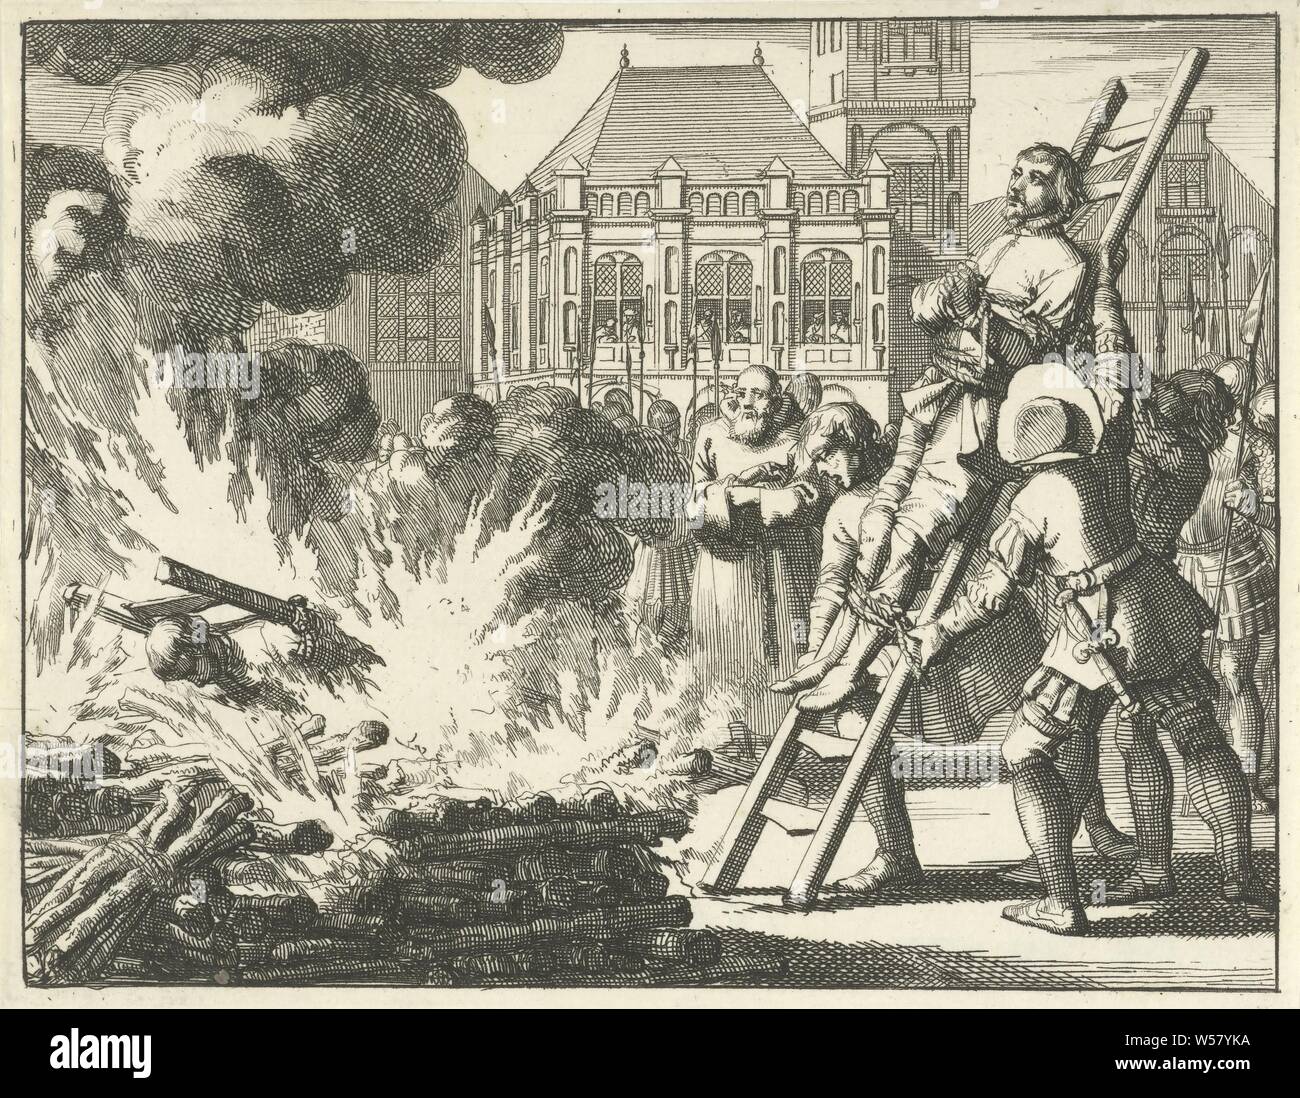 Jacob de Geldersman and Dirk Pietersz. Smuel op de Dam at the stake, 1546, Dopers Jacob de Geldersman and Dirk Pietersz. Smuel op de Dam in Amsterdam on ladders burned at the stake, execution of heretic, e.g. by burning at the stake, 'auto-da-fé', violent death by burning at the stake, pyre, Amsterdam City Hall (14th century-1652), Dam, Jacob de Geldersman, Dirk Pietersz. Smuel, Jan Luyken, Amsterdam, 1693, paper, etching, h 118 mm × w 152 mm Stock Photo